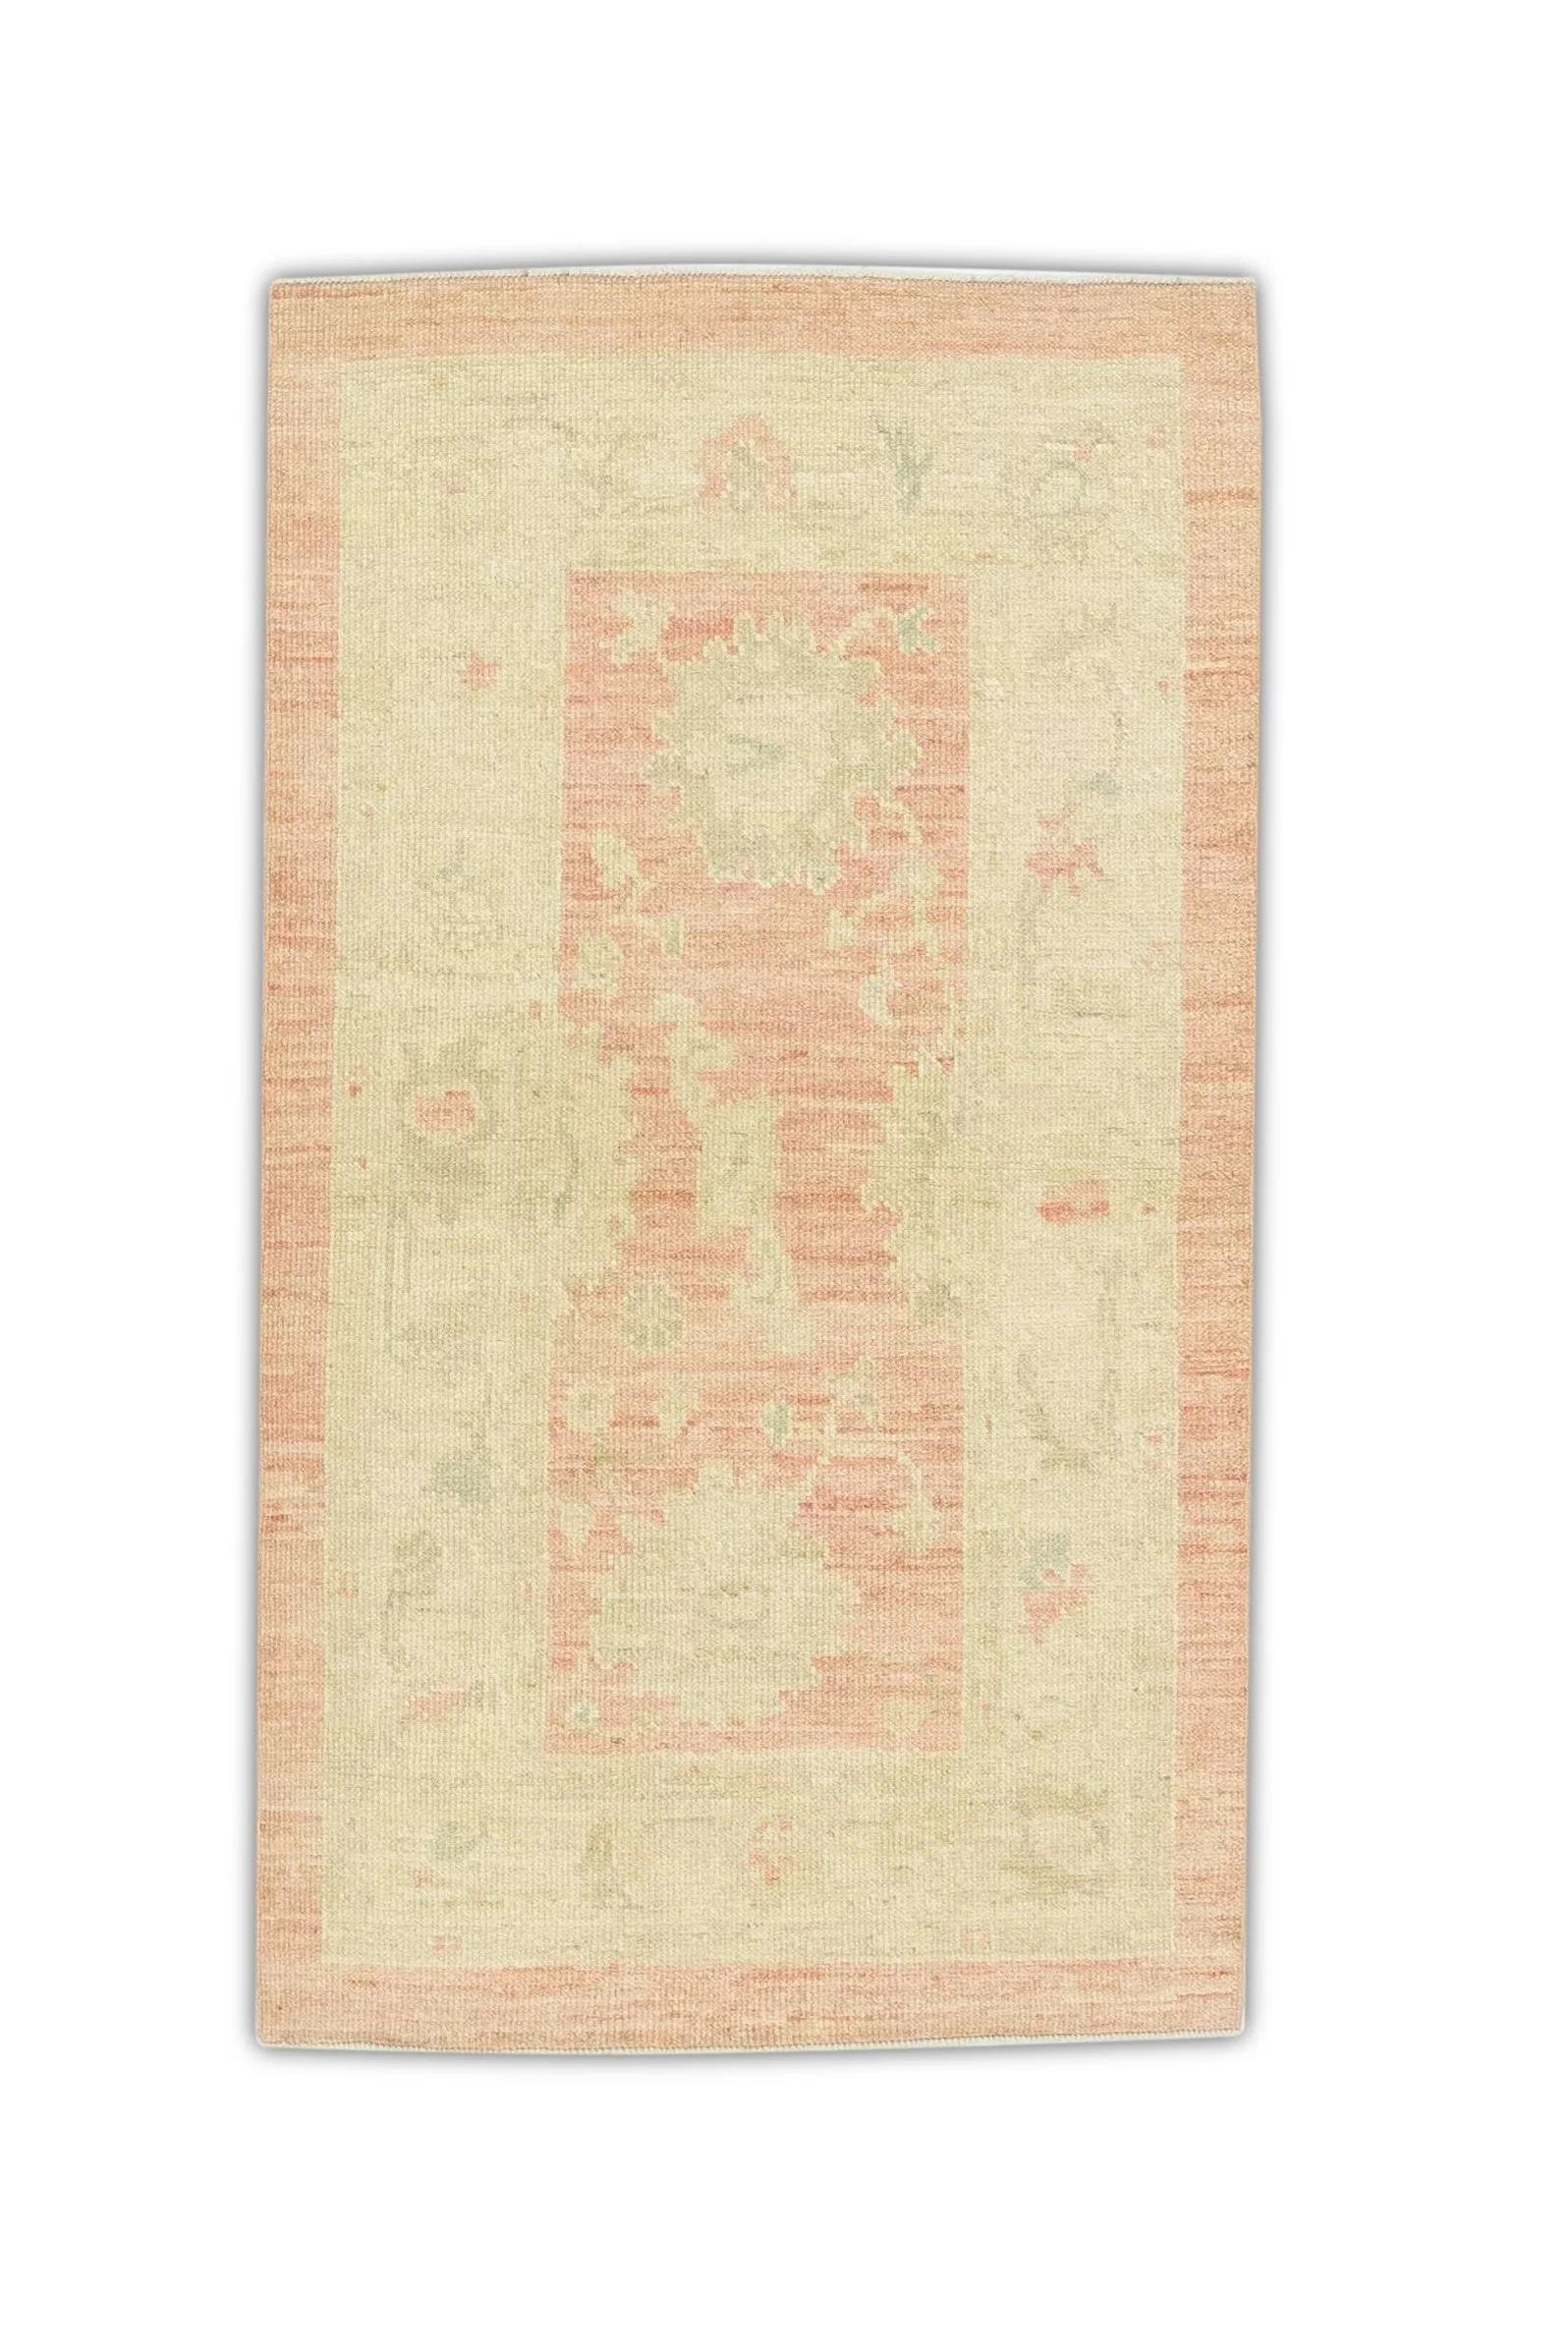 Contemporary Red & Beige Handwoven Wool Turkish Oushak Rug 2'11